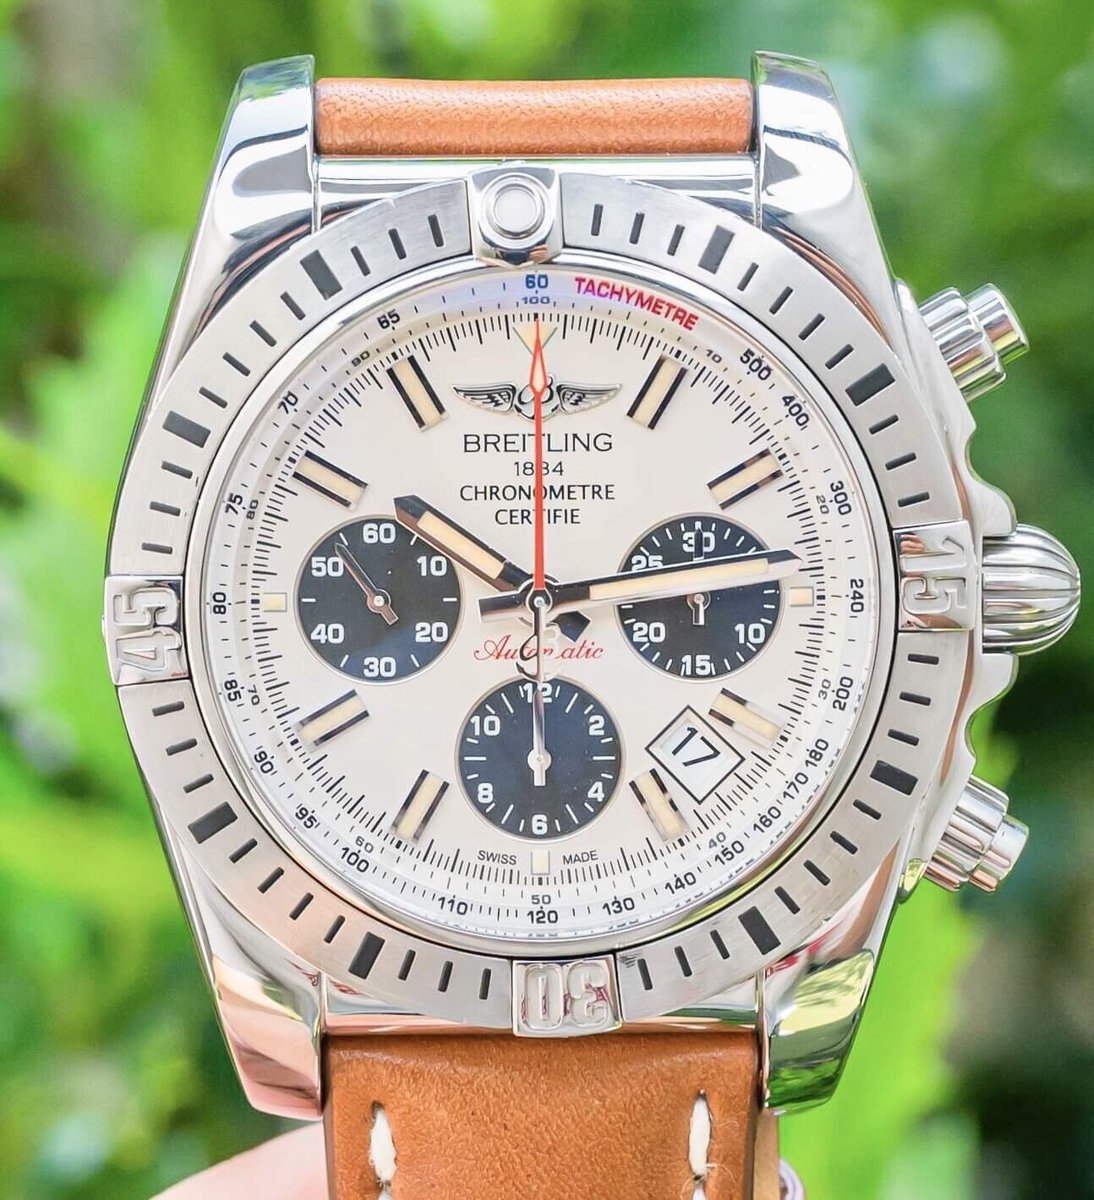 Breitling Chronomat 44 Airborne “Panda” 30th Anniversary $8K MSRP Boxes AB0115

For sale by @sivils_luxury

$4,995

#breitling #watches #valueyourwatch #watchmarketplace #luxury #luxurylife #entrepreneur #luxurywatch #luxurywatches #luxurydesign #businesswatch #watchfam